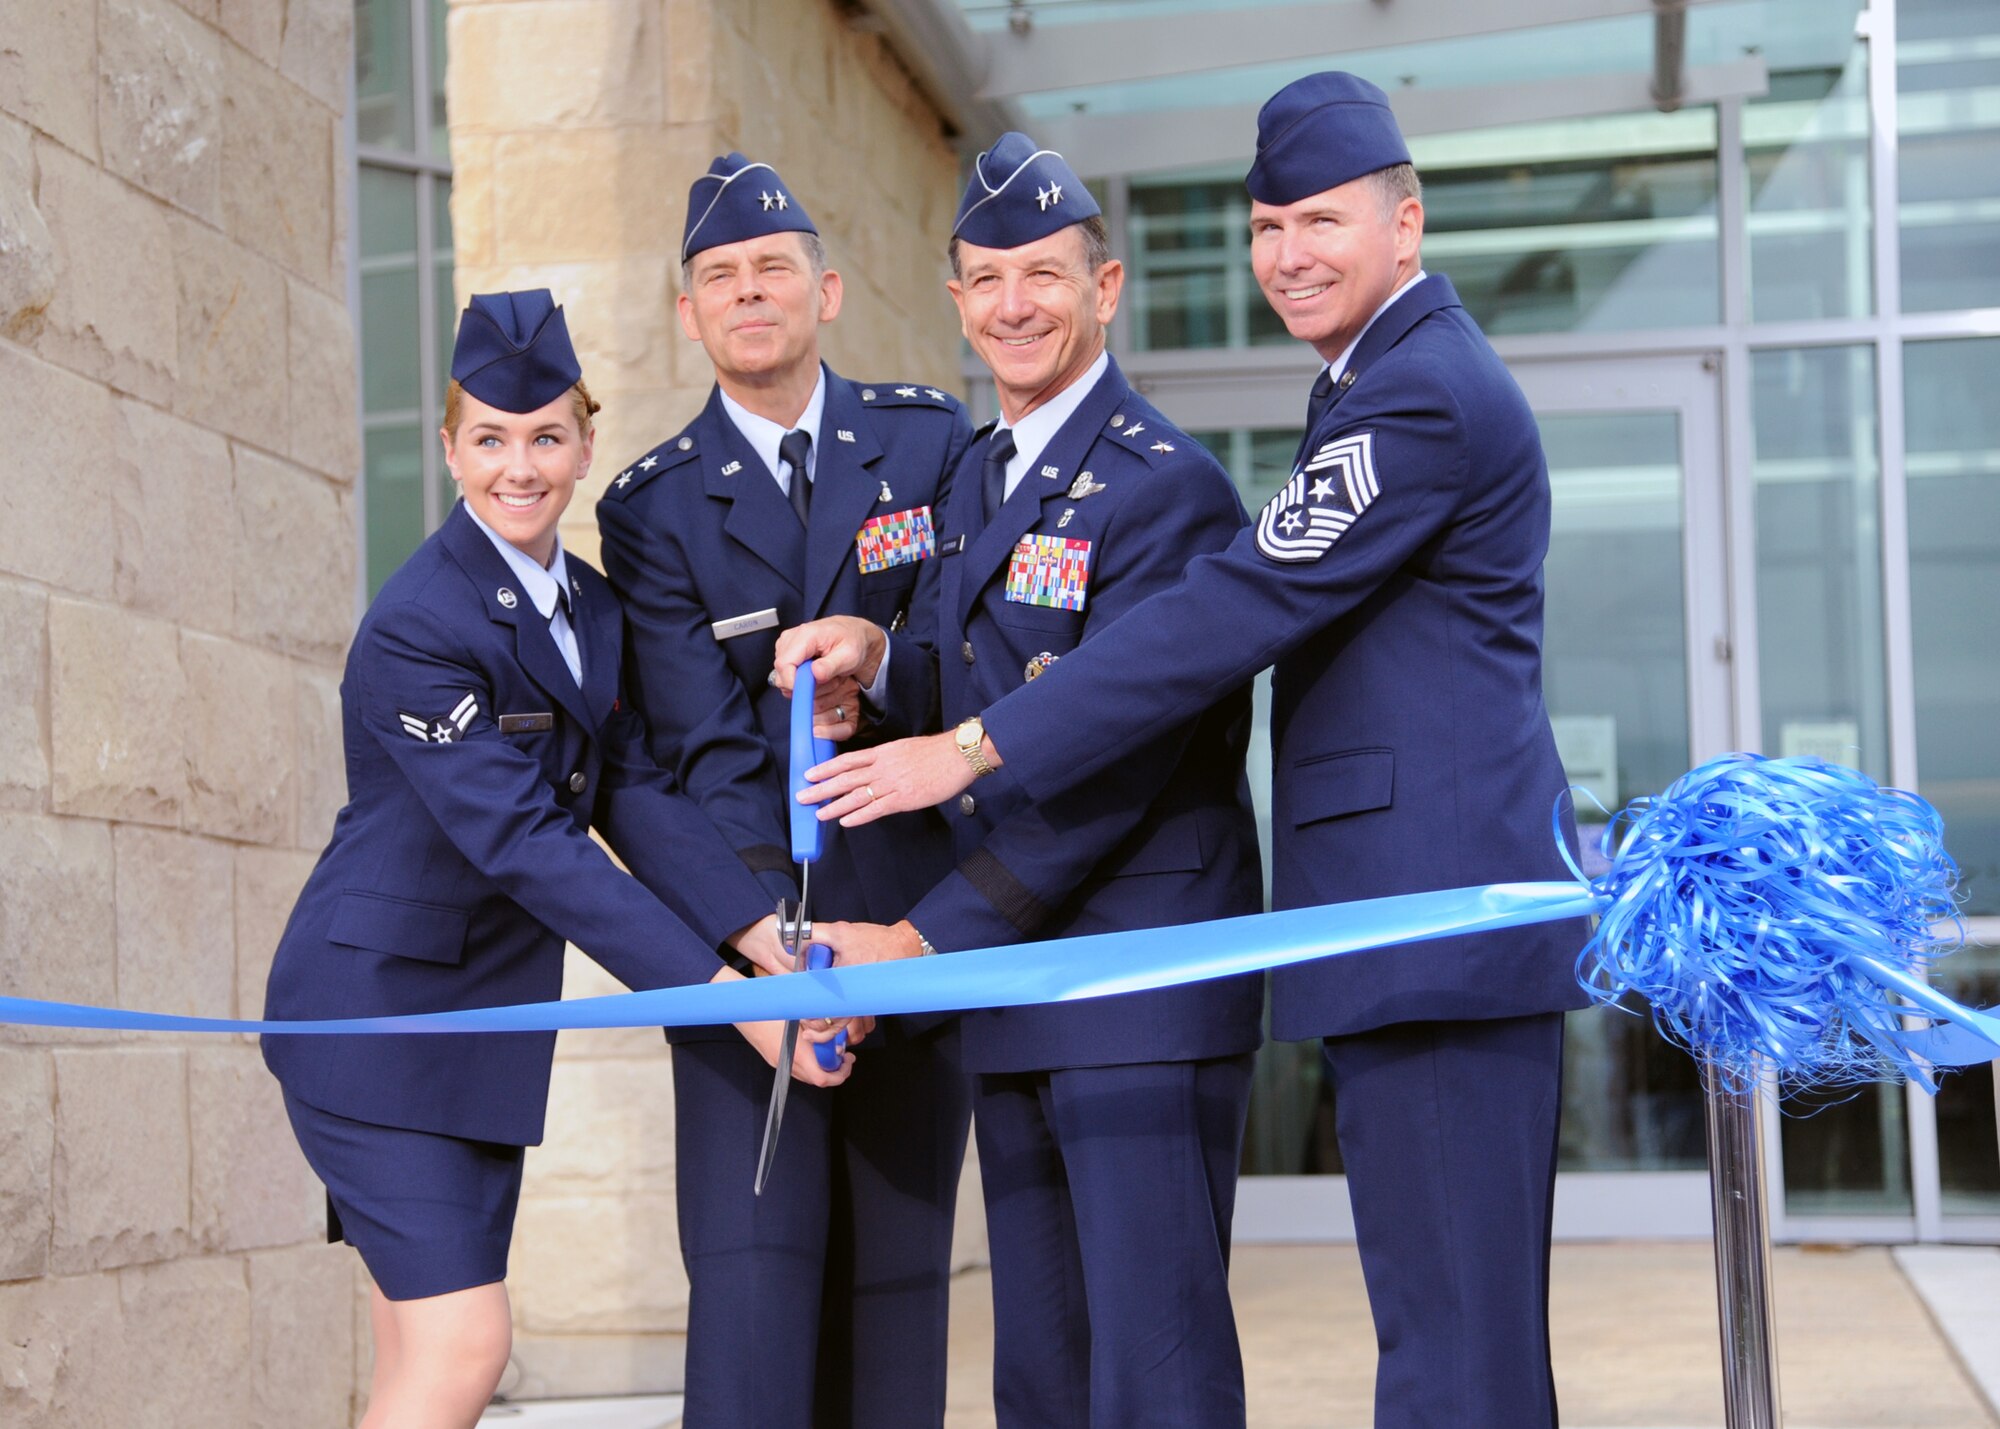 Airman 1st Class Chelsey Huff, Maj. Gens. Gerard Caron and Byron Hepburn and Chief Master Sgt. Richard Robinson (left to right) cut the ribbon in front of the new Air Force Postgraduate Dental School and Clinic at Joint Base San Antonio-Lackland, Texas, June 20. The school is the Air Force flagship for dental education and specialty services. Huff is a dental assistant for the 59th Dental Training Squadron and Caron is the assistant surgeon general for Dental Services and commander of the 79th Medical Wing. Hepburn is the director of the San Antonio Military Health System and commander of the 59th Medical Wing. Robinson recently retired as the command chief of the 59th Medical Wing. (U.S. Air Force photo/ Airman 1st Class Courtney Moses)